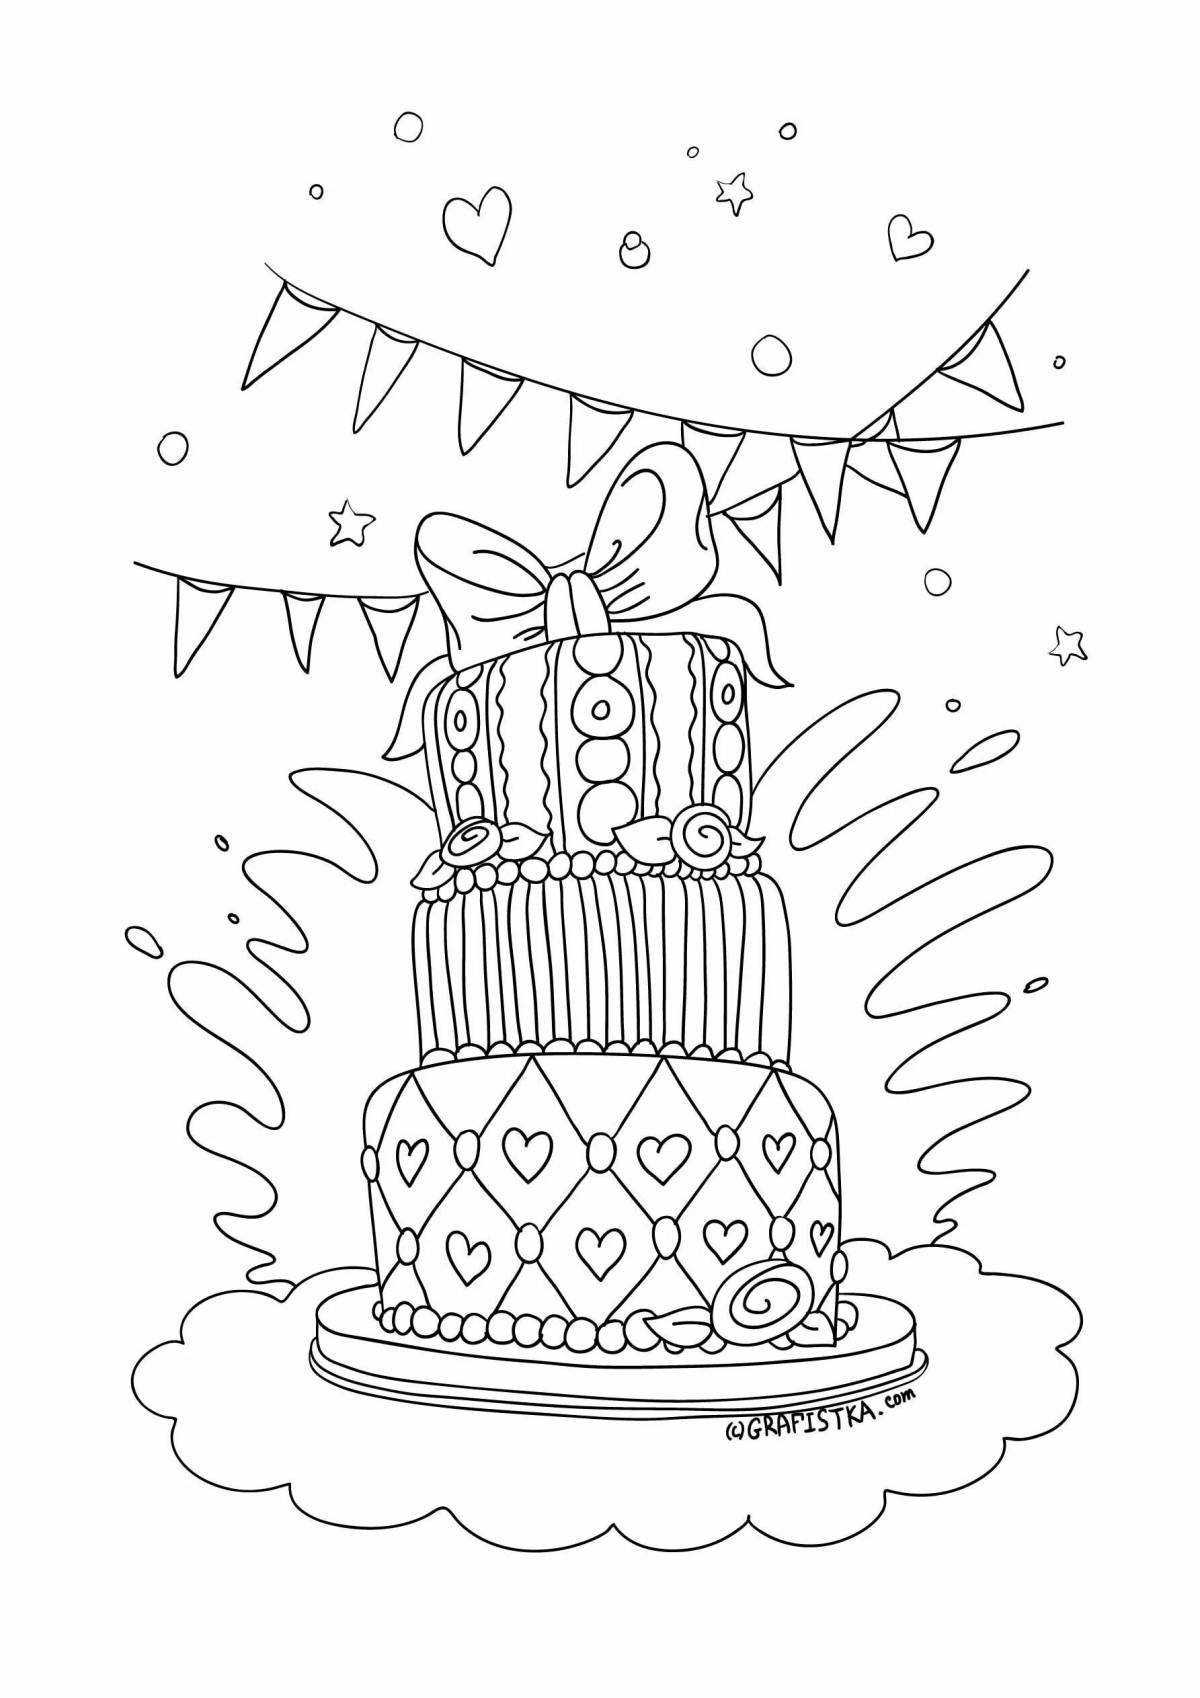 Playful birthday cake coloring page